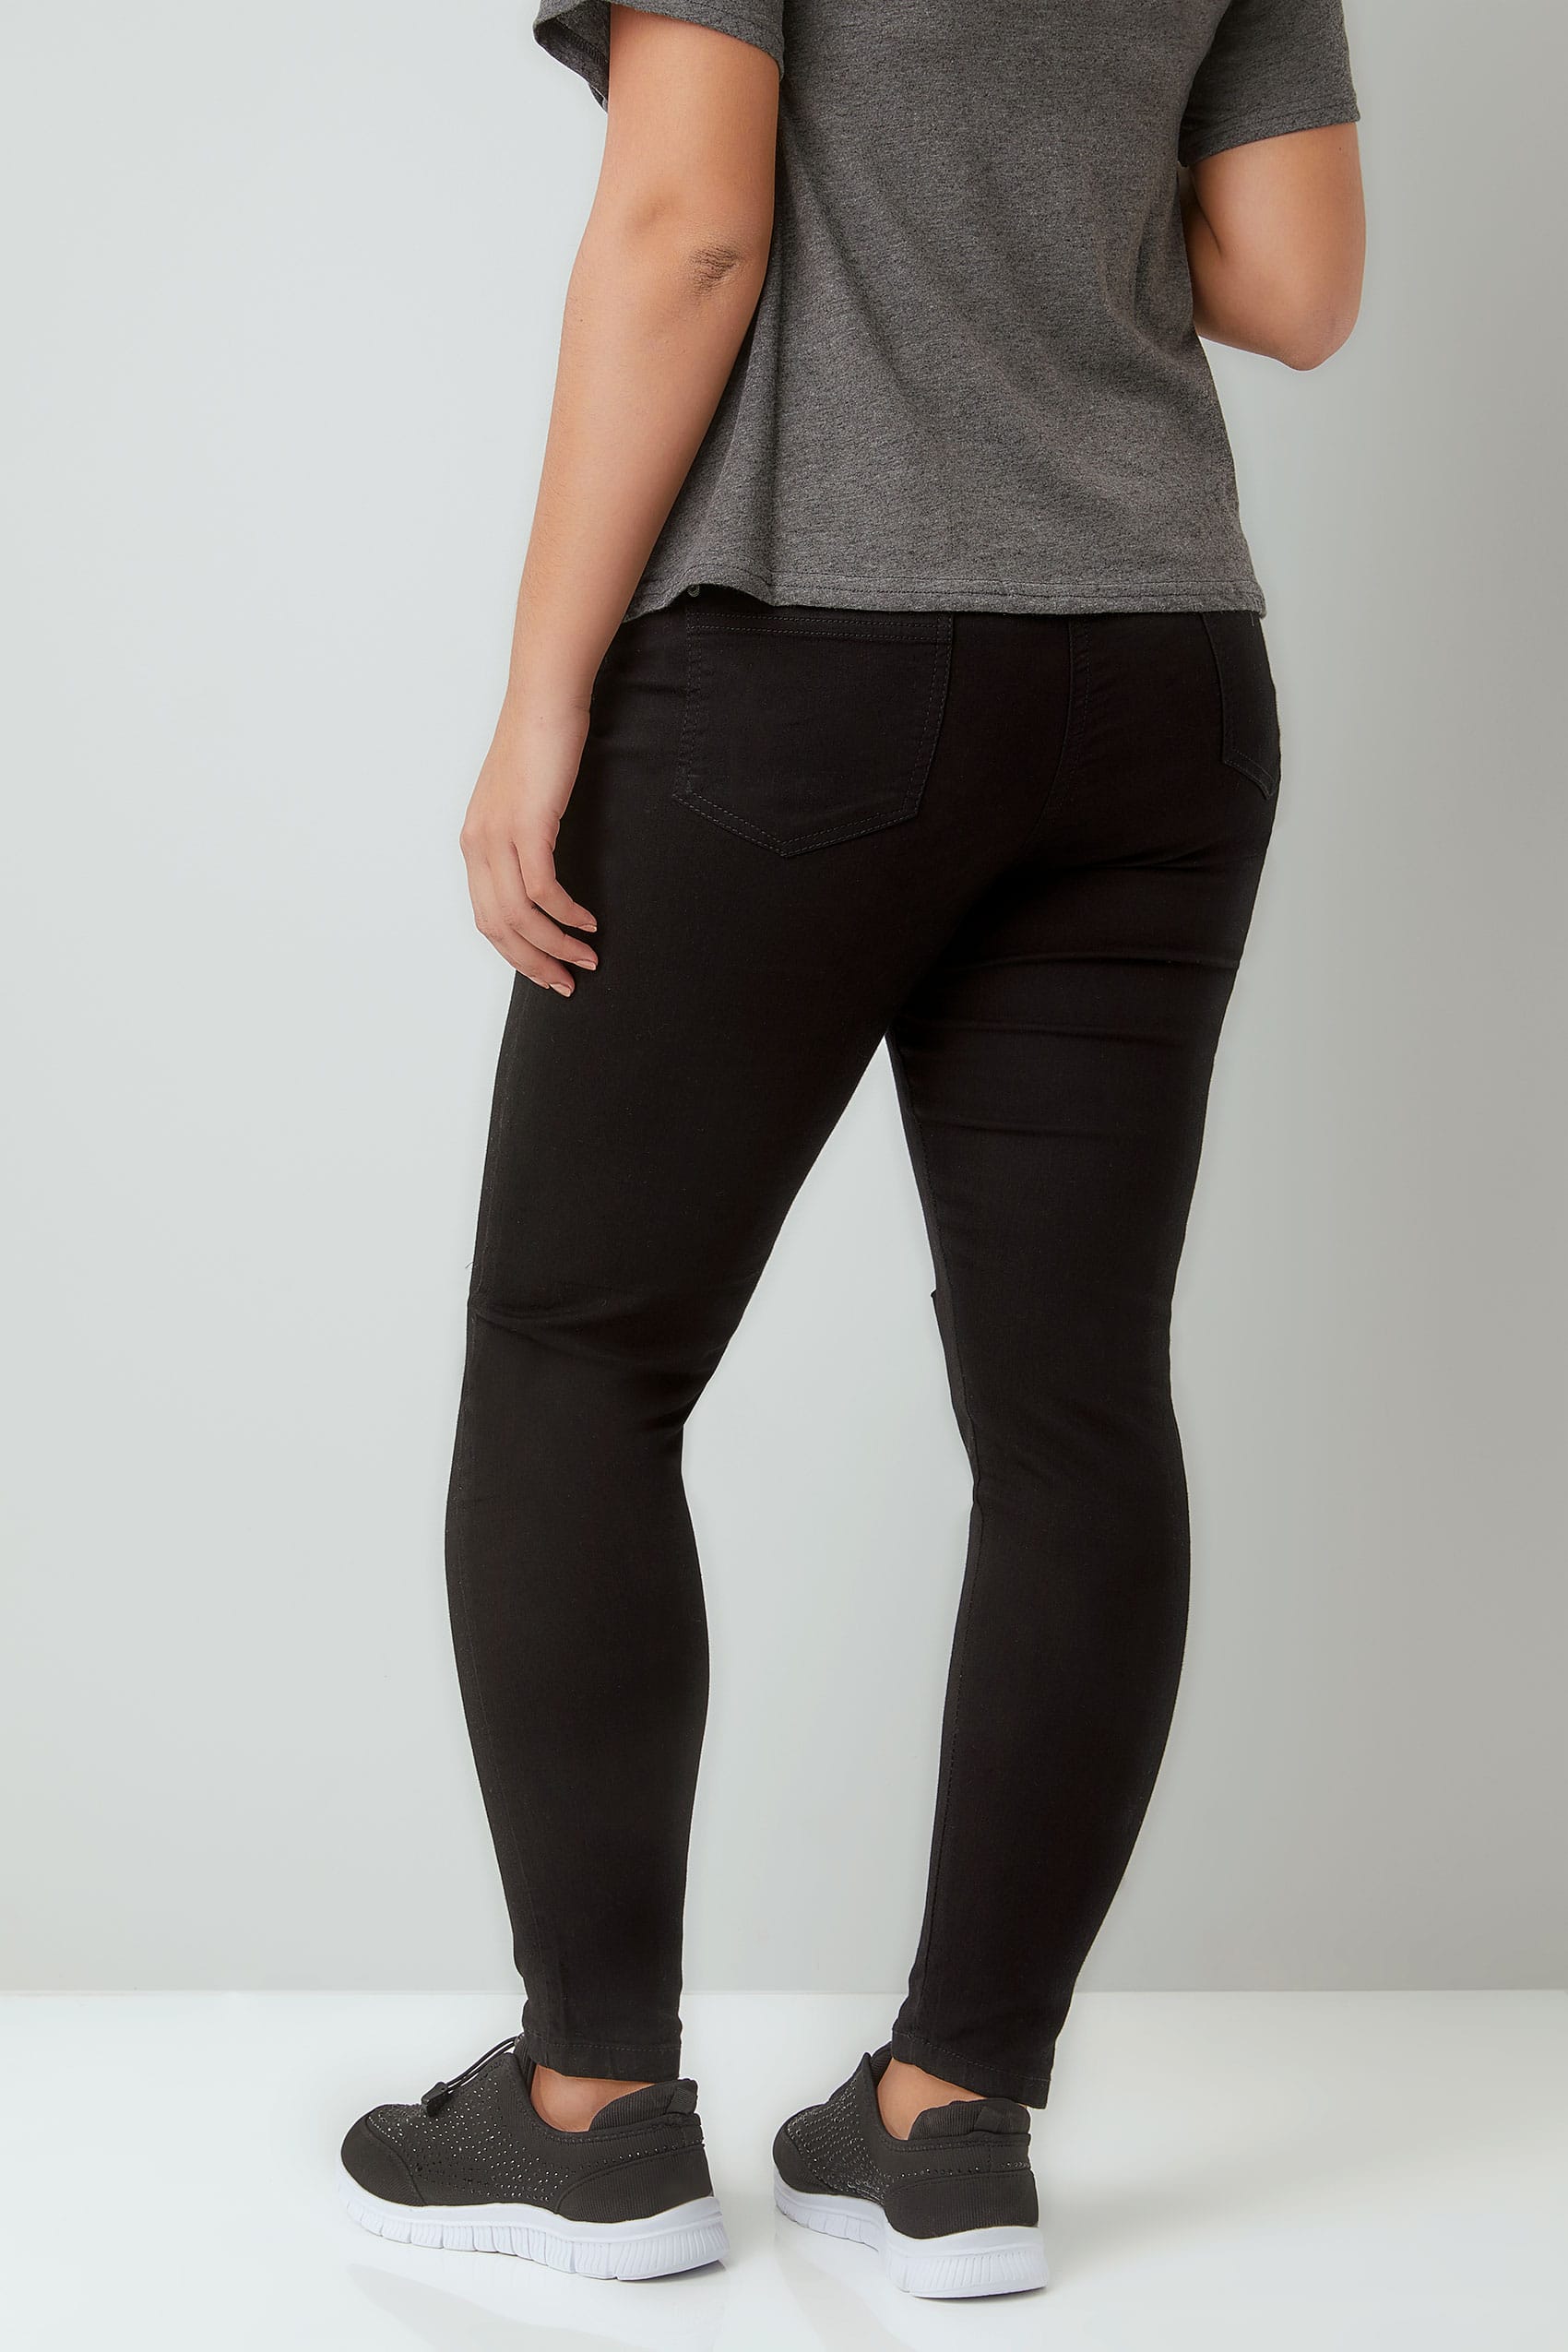 Black Super Stretch Skinny Jeans With Ripped Knees, Plus size 16 to 30